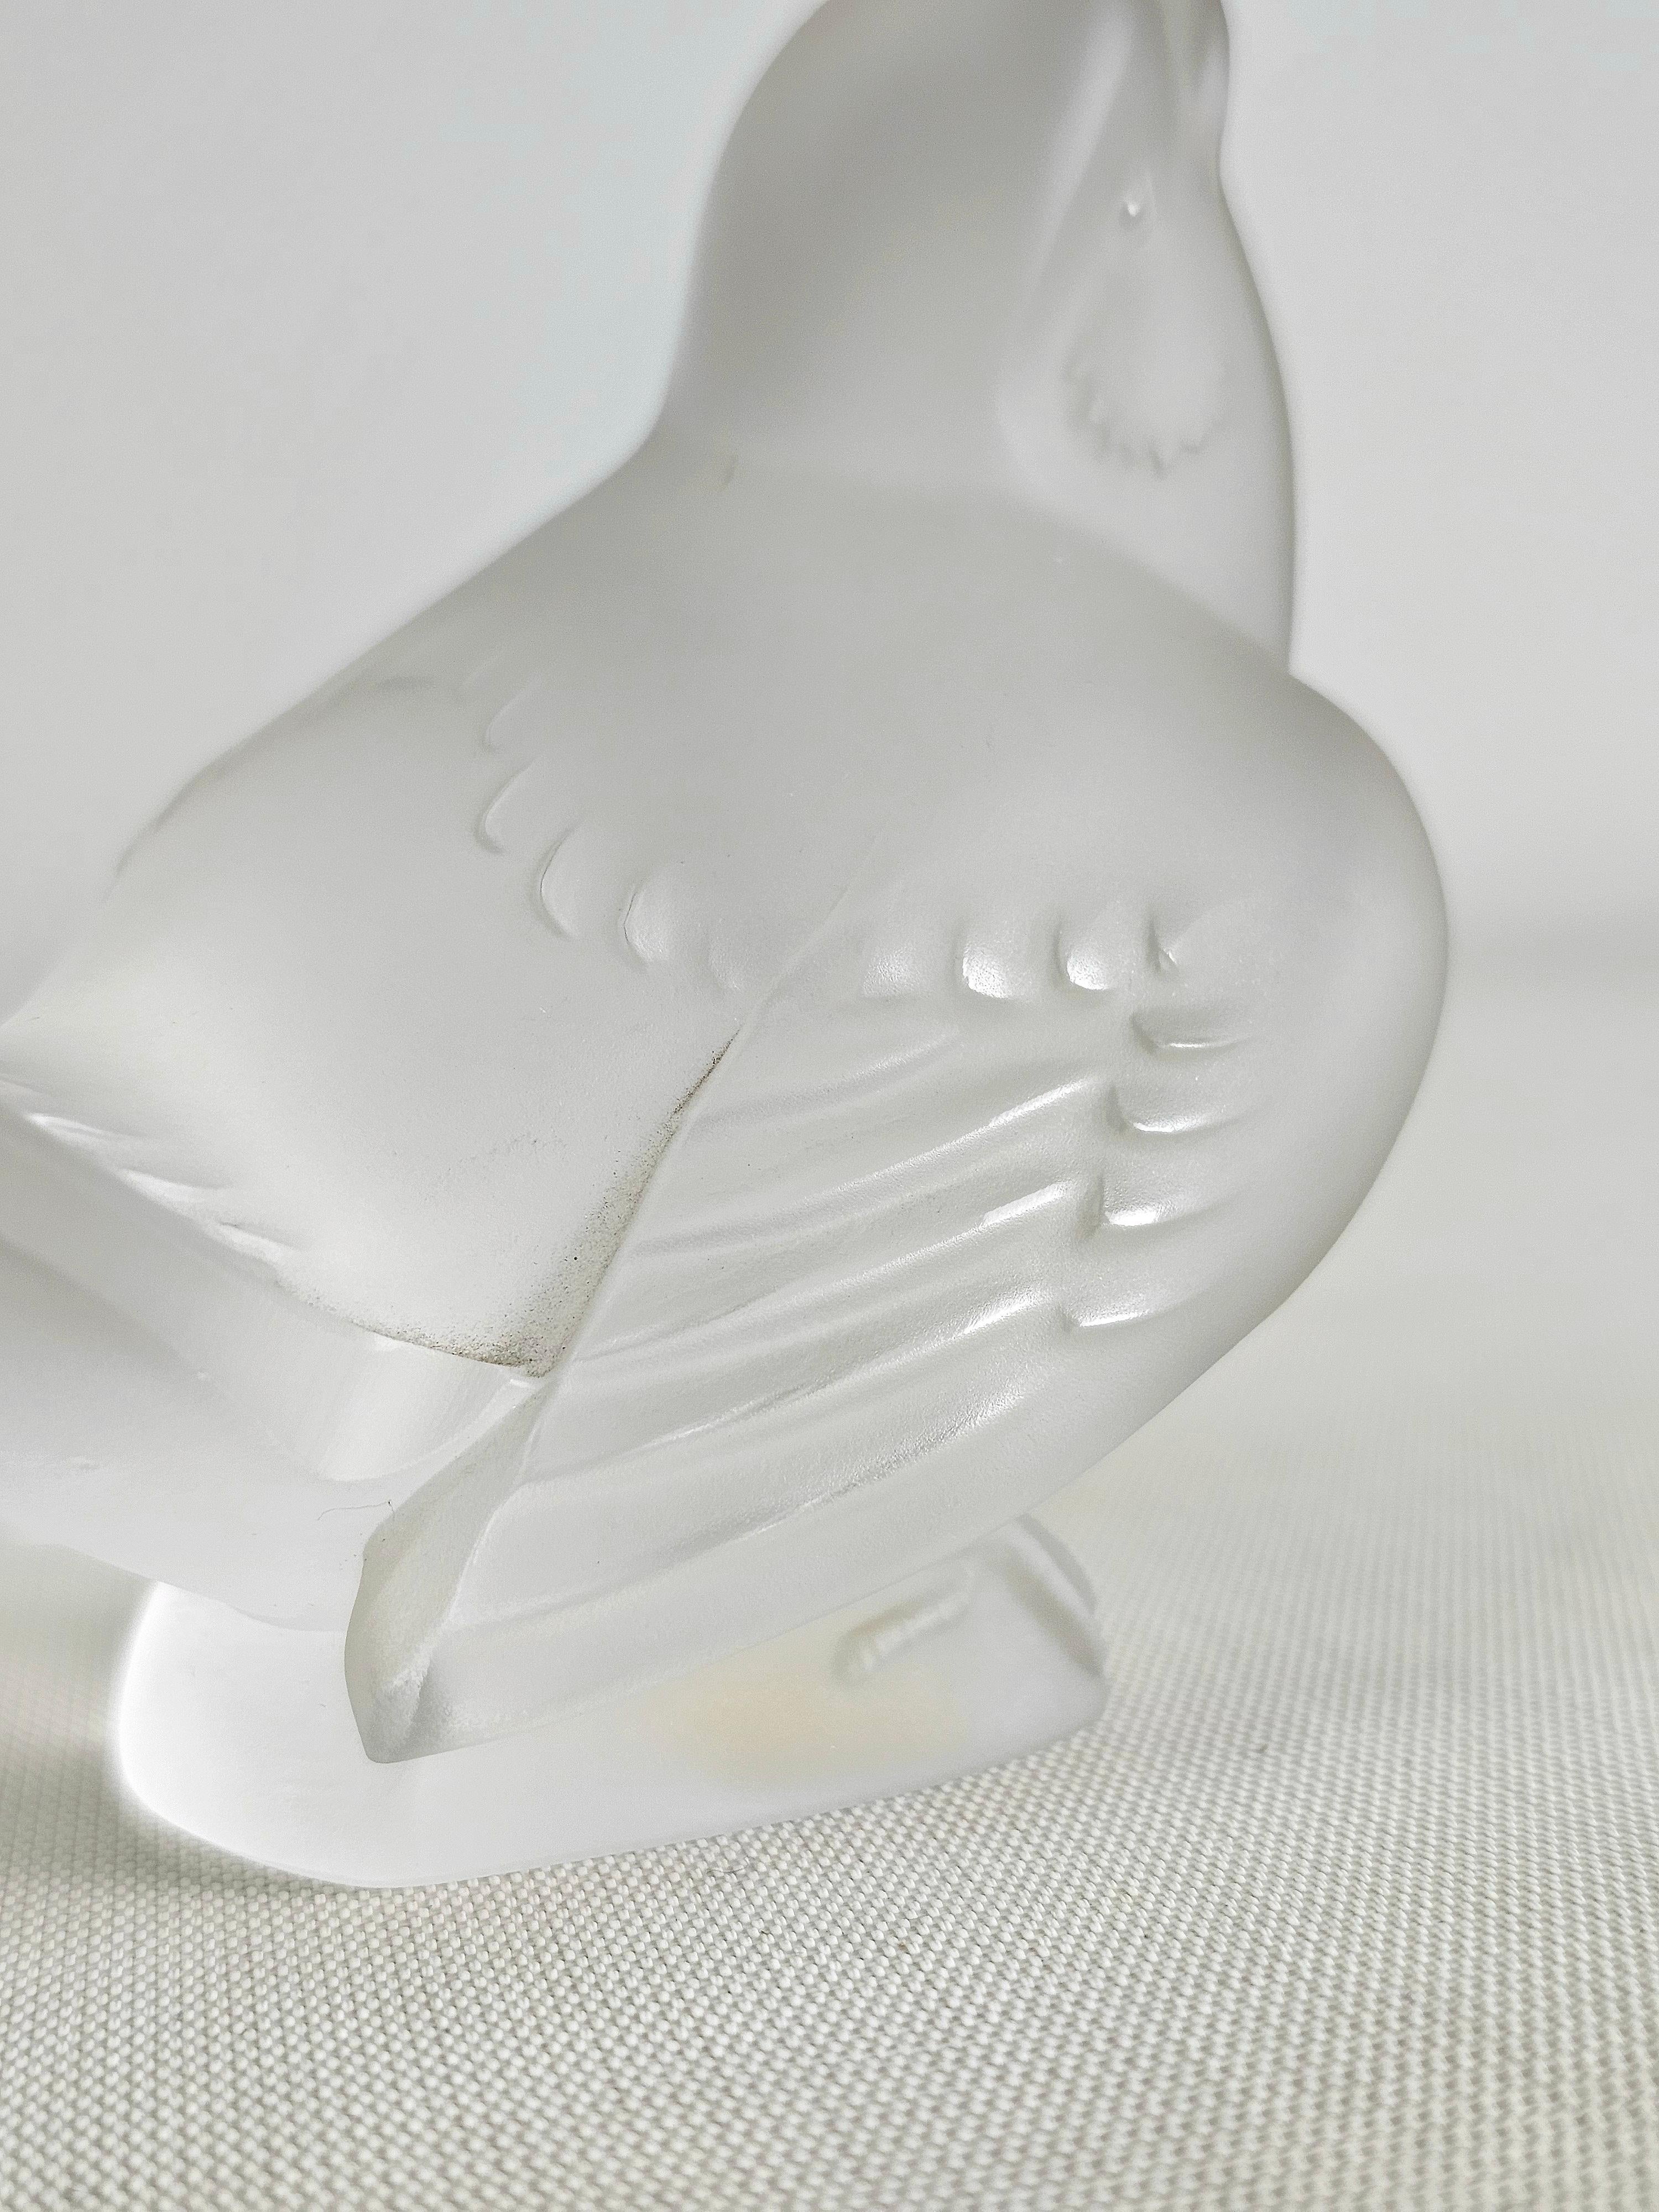 French Decorative Object Animal Sculpture Crystal Glass Lalique Midcentury France 1960s For Sale